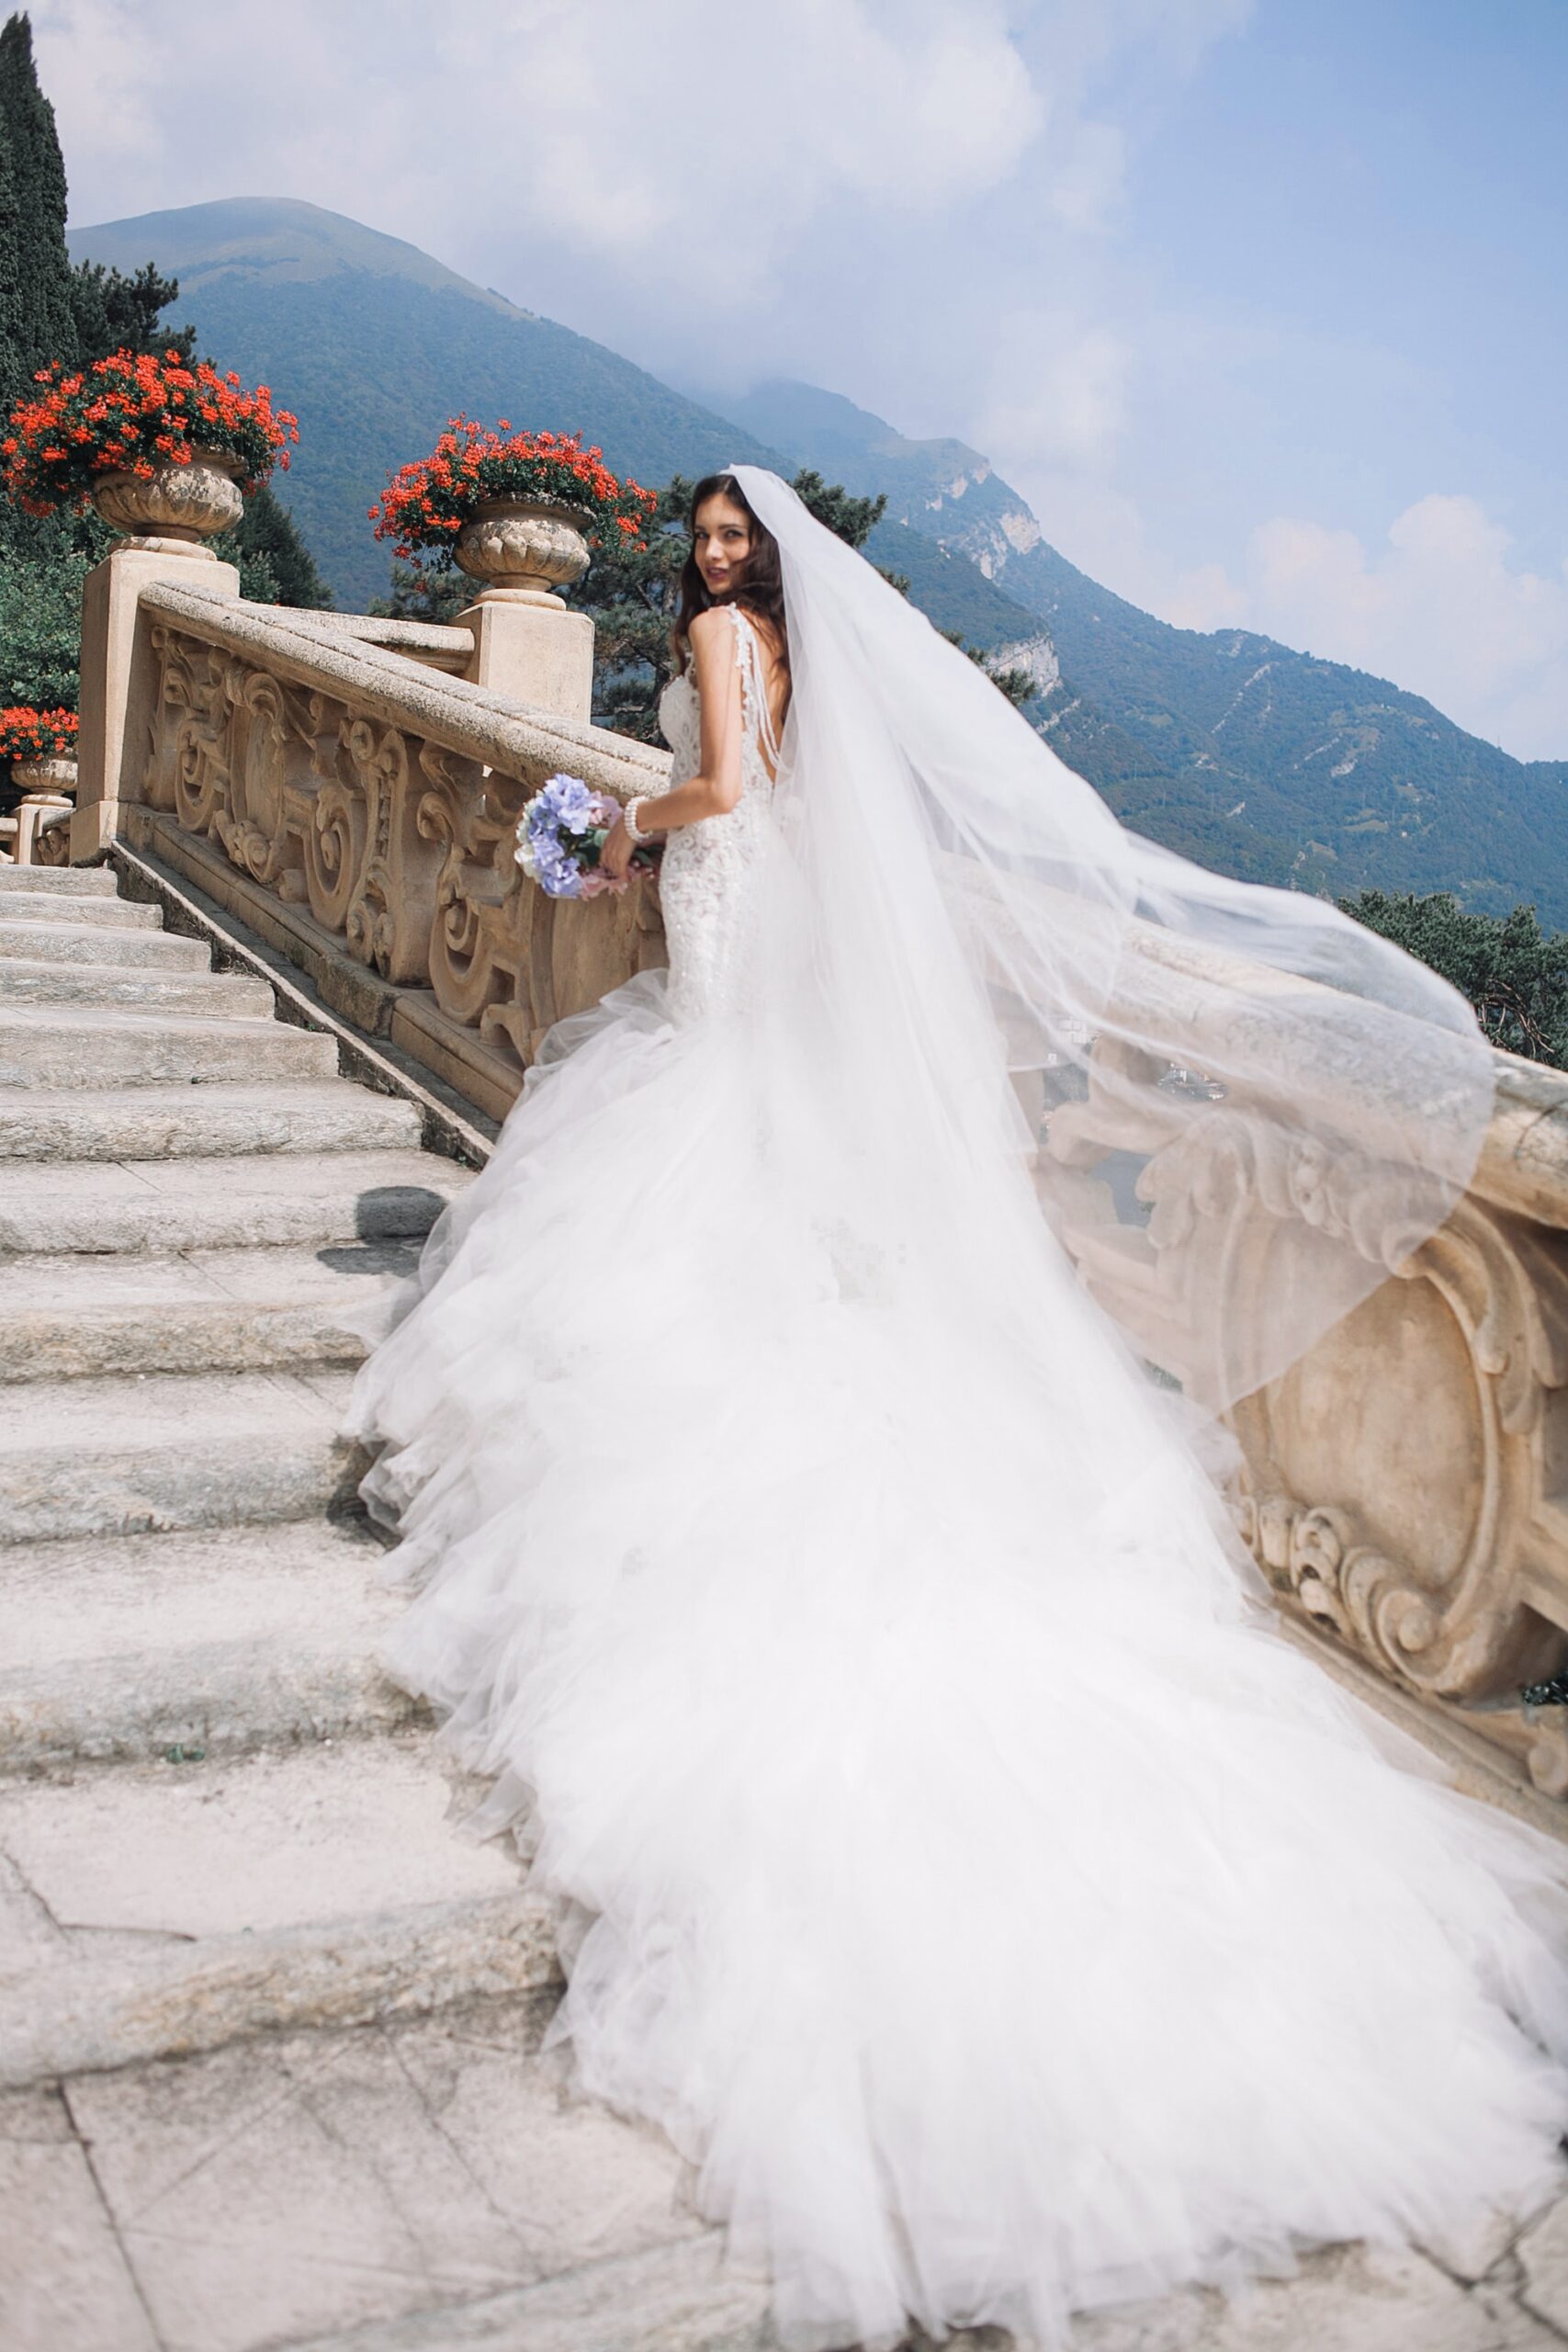 How to Buy a Wedding Dress: The Ultimate Guide for Brides-To-Be